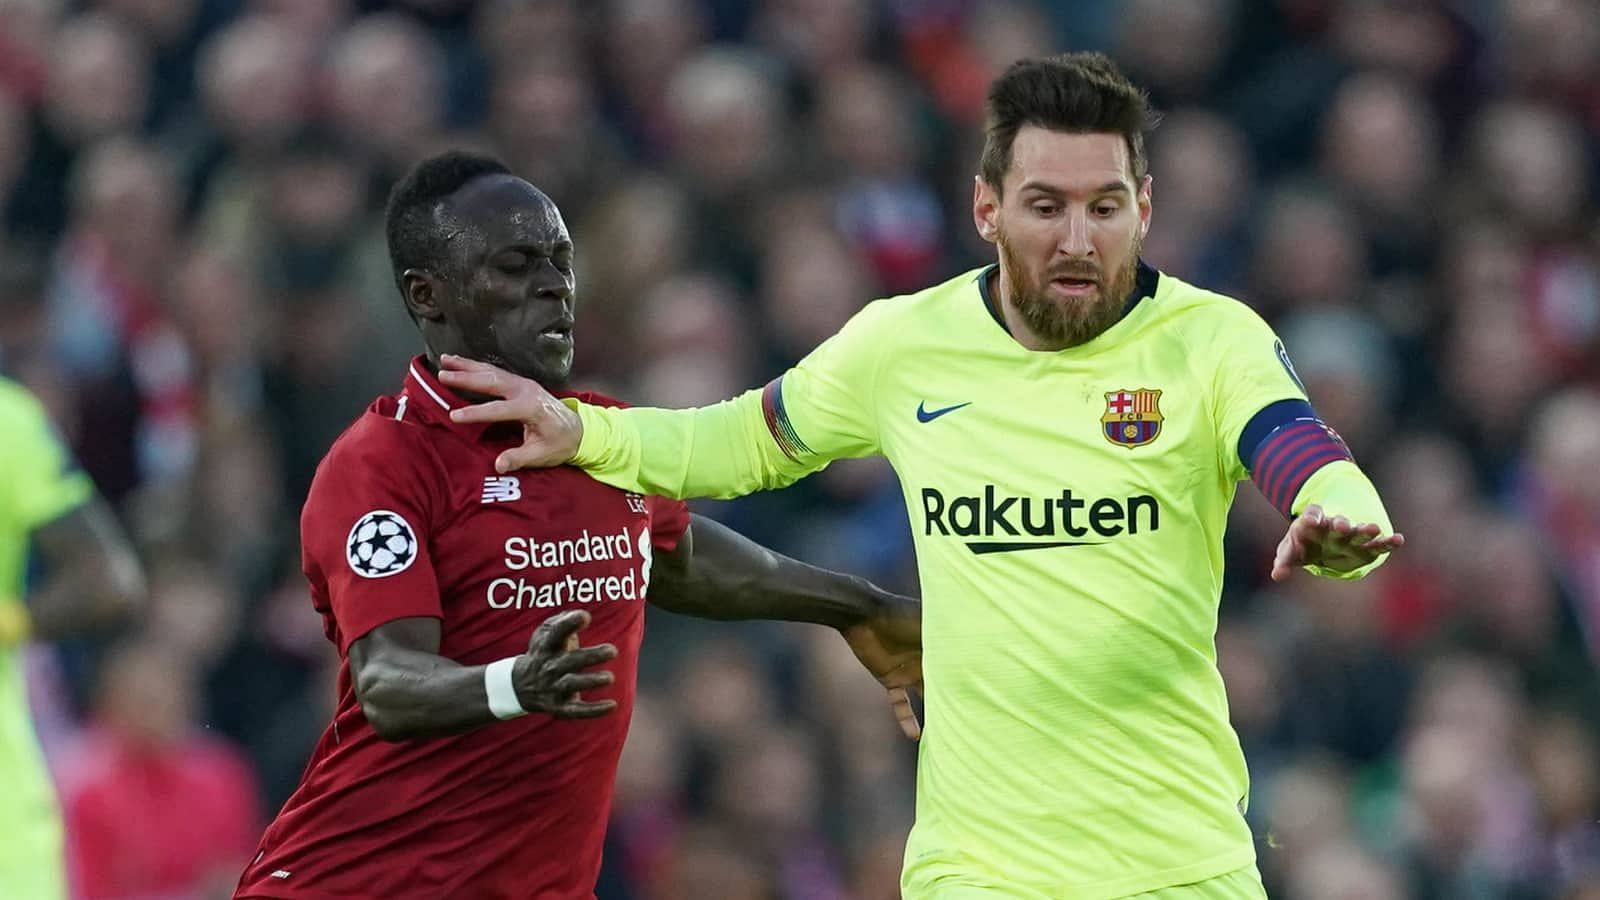 Messi wanted Mane to join Barca